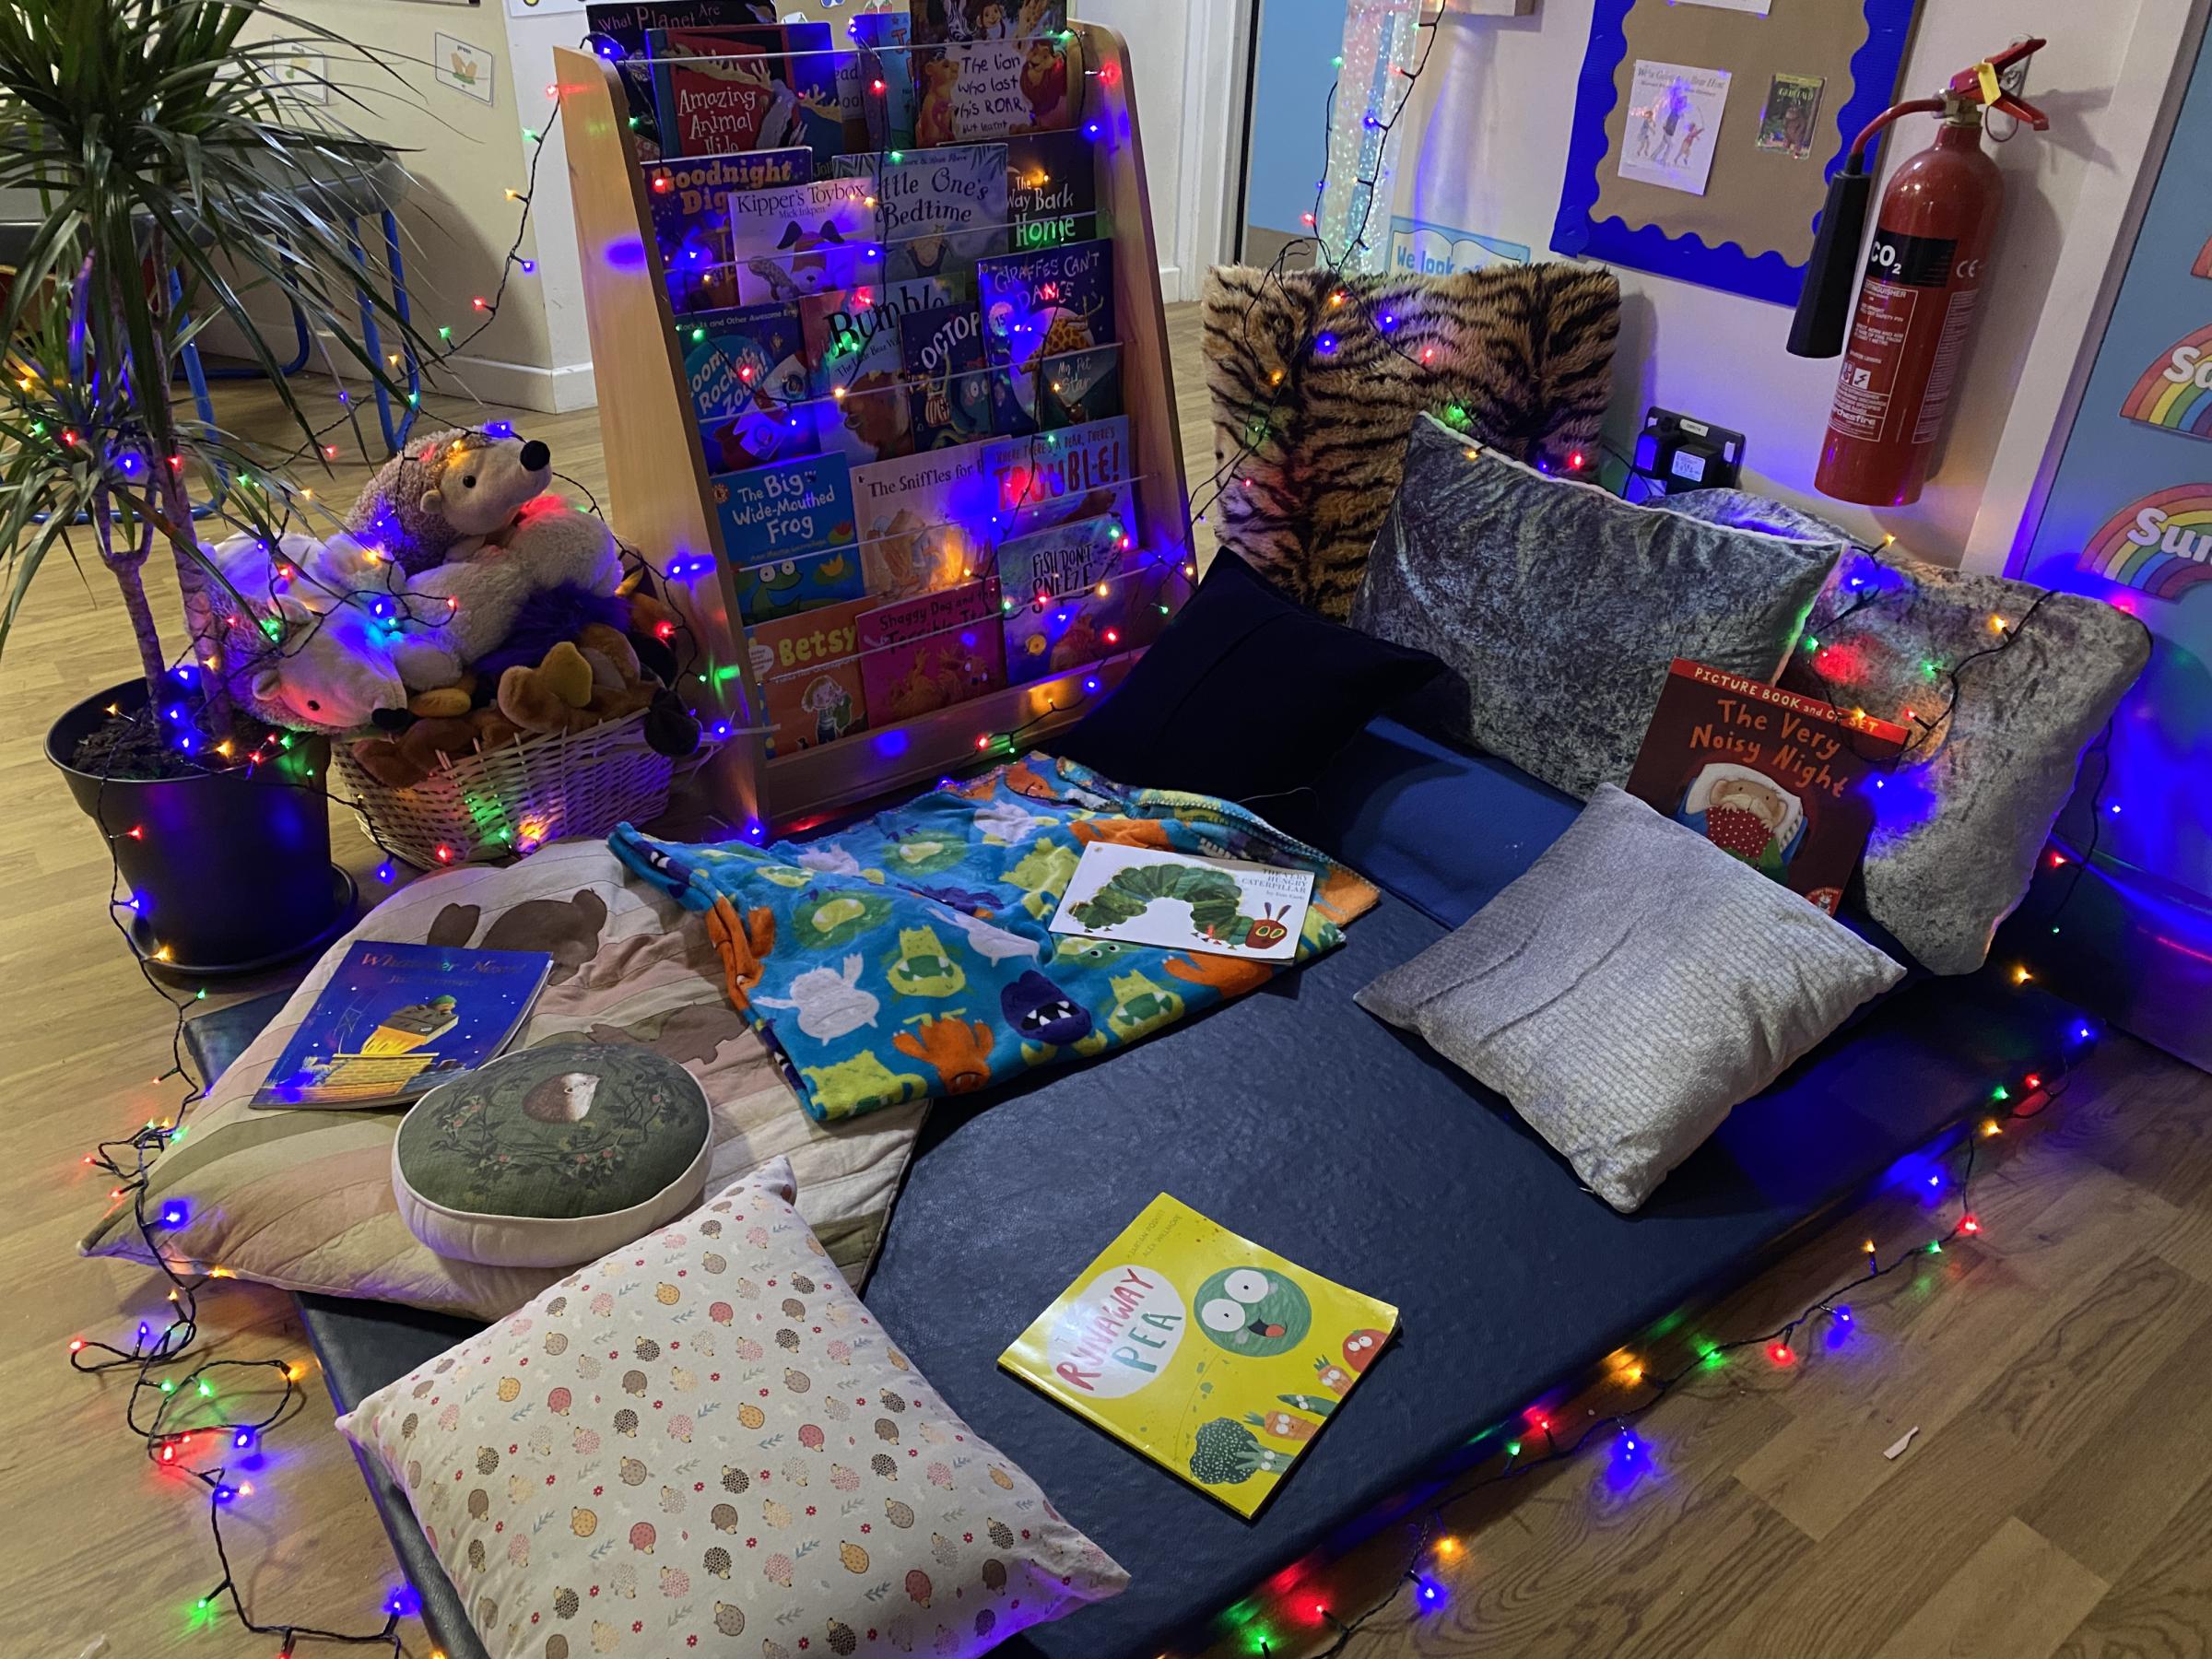 Bucks Free Press: 90 parents attended a presentation about reading and then visited beautifully set up classrooms to relax and immerse their children in the joy of books.